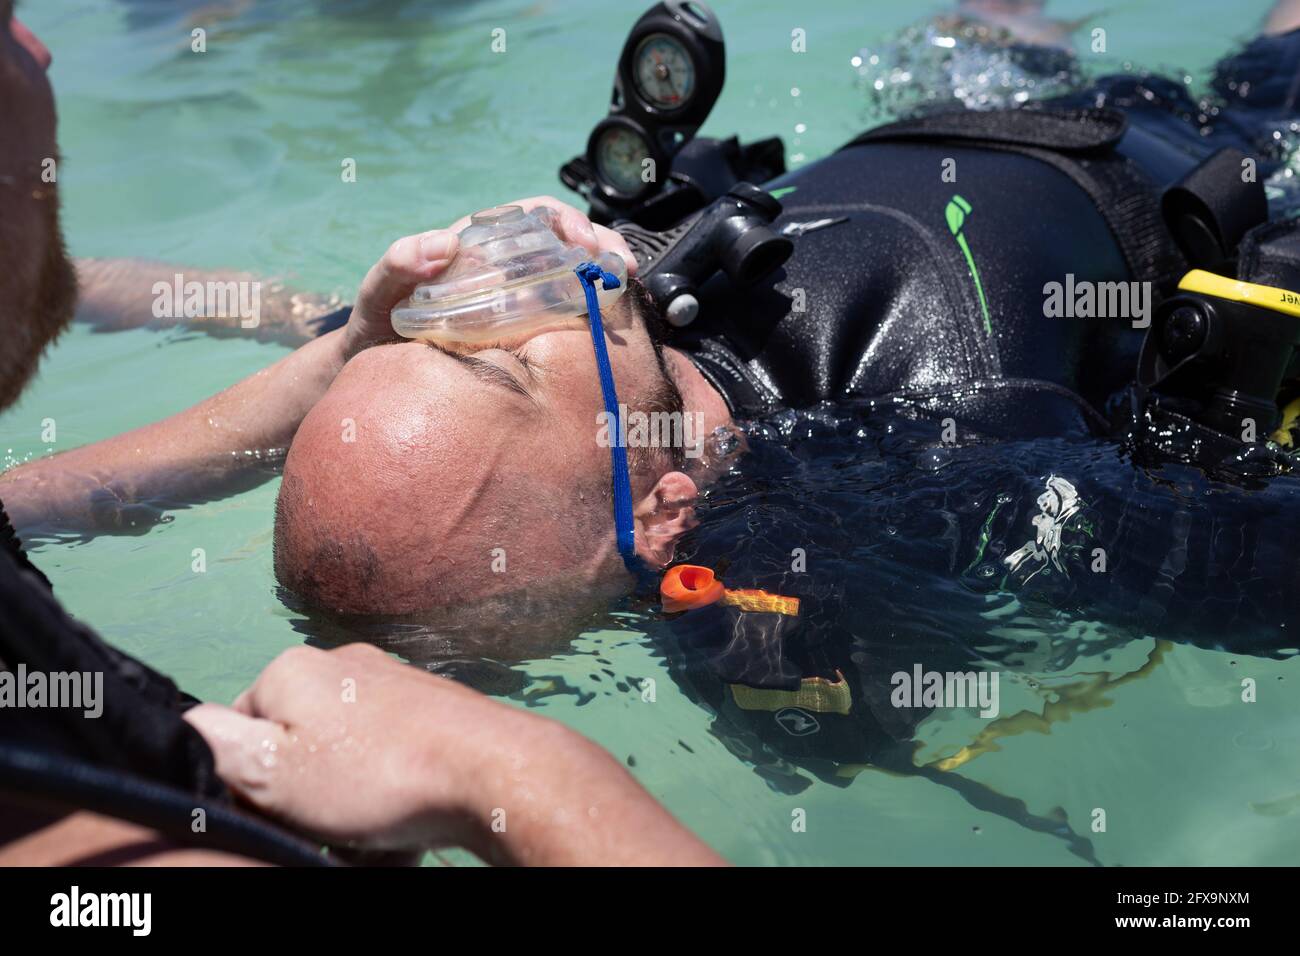 Panglao, Philippines - April 29, 2021: Scuba diver, instructor in confined water teaching, studying, evaluating skills, rescue skills Stock Photo